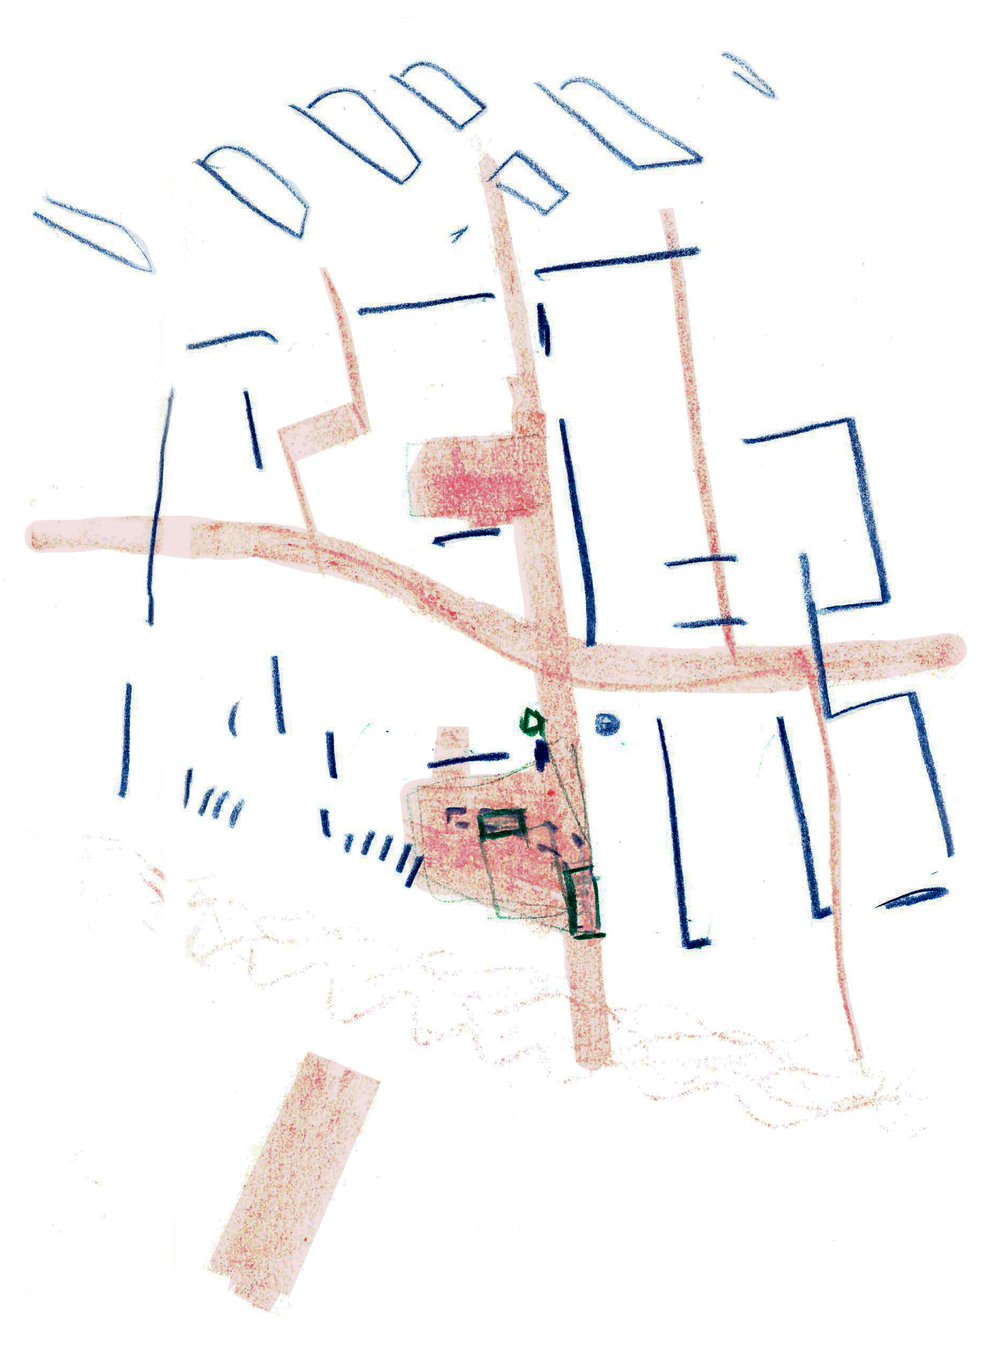 SITE PLAN ABSTRACT_EDITED.jpg